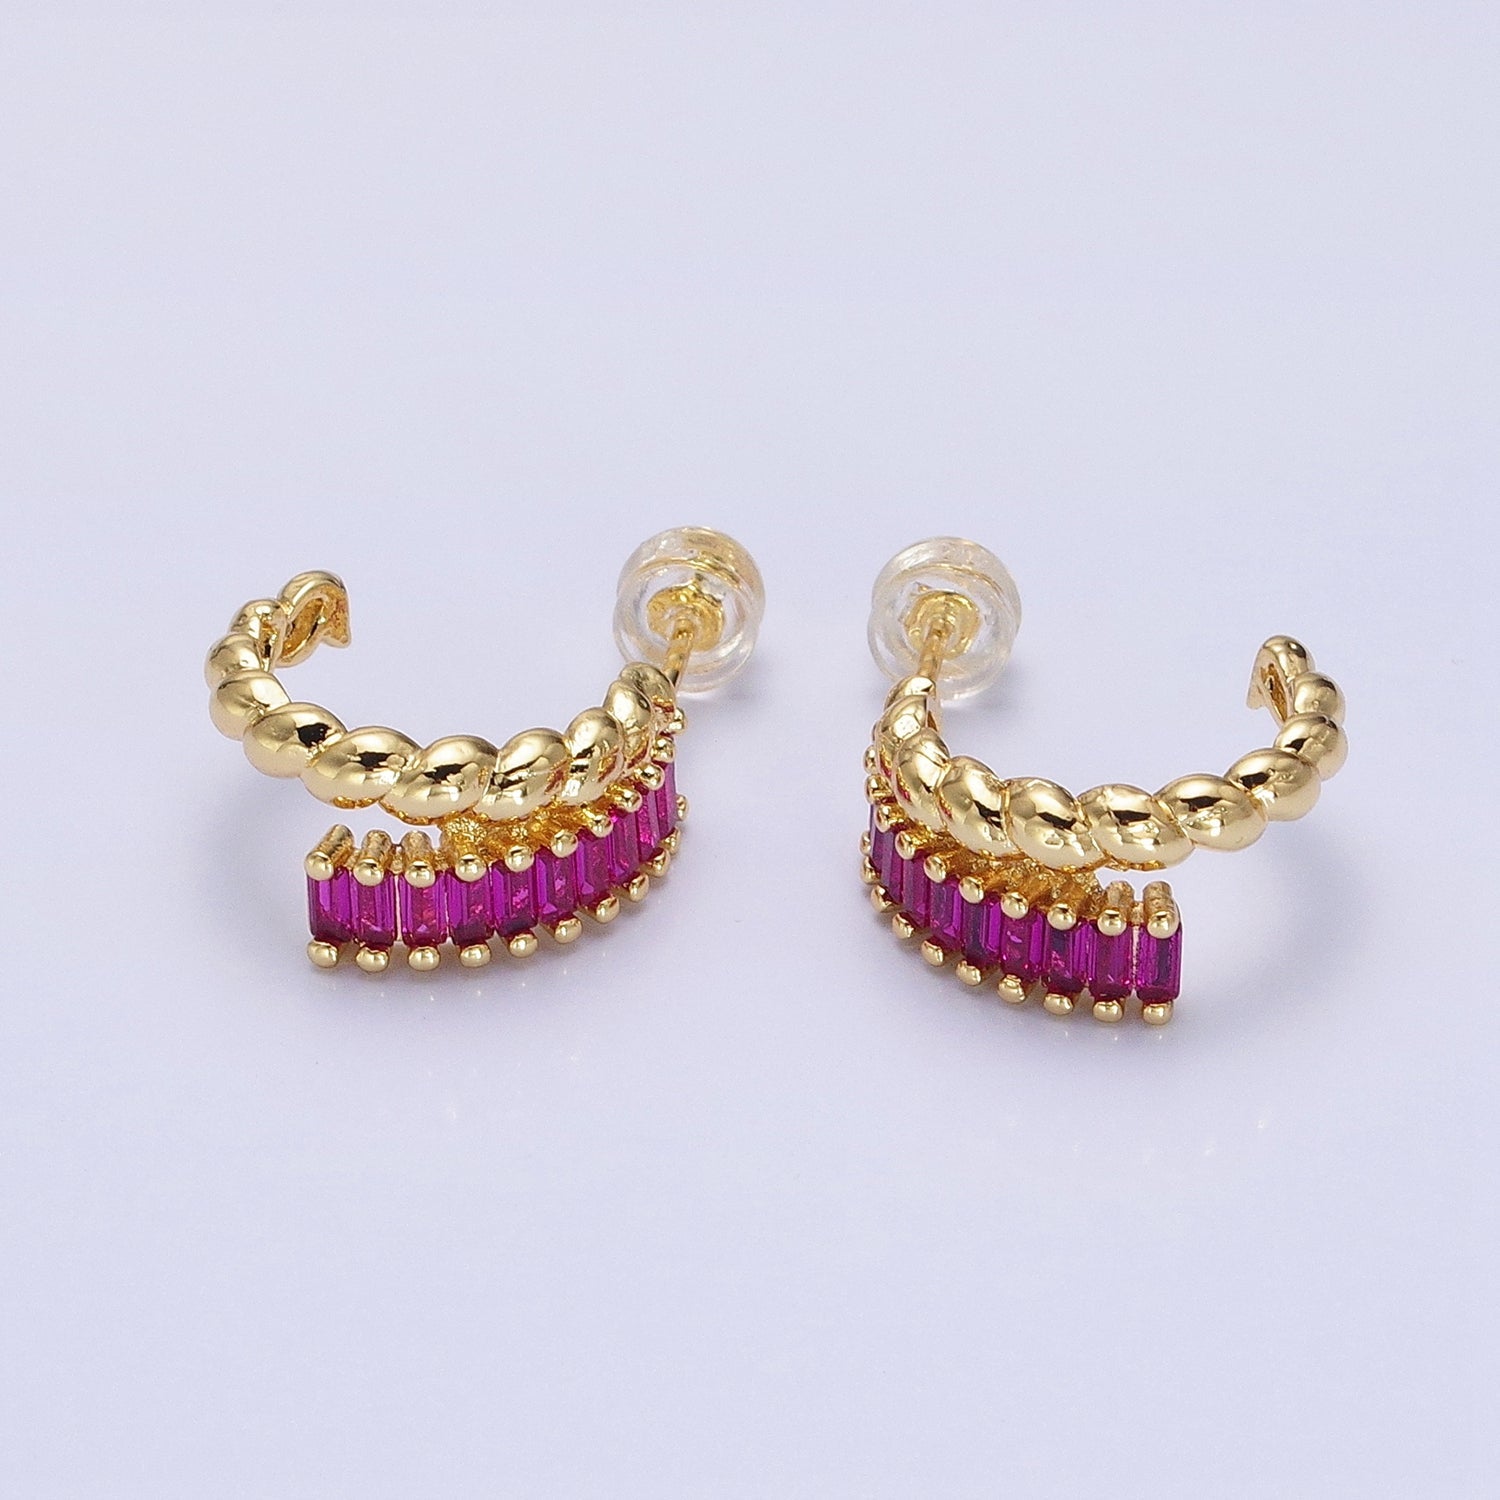 14K Gold Filled Clear, Fuchsia, Green Baguette Croissant Double Band C-Shaped Hoop Earrings in Gold & Silver | AB1508 - AB1513